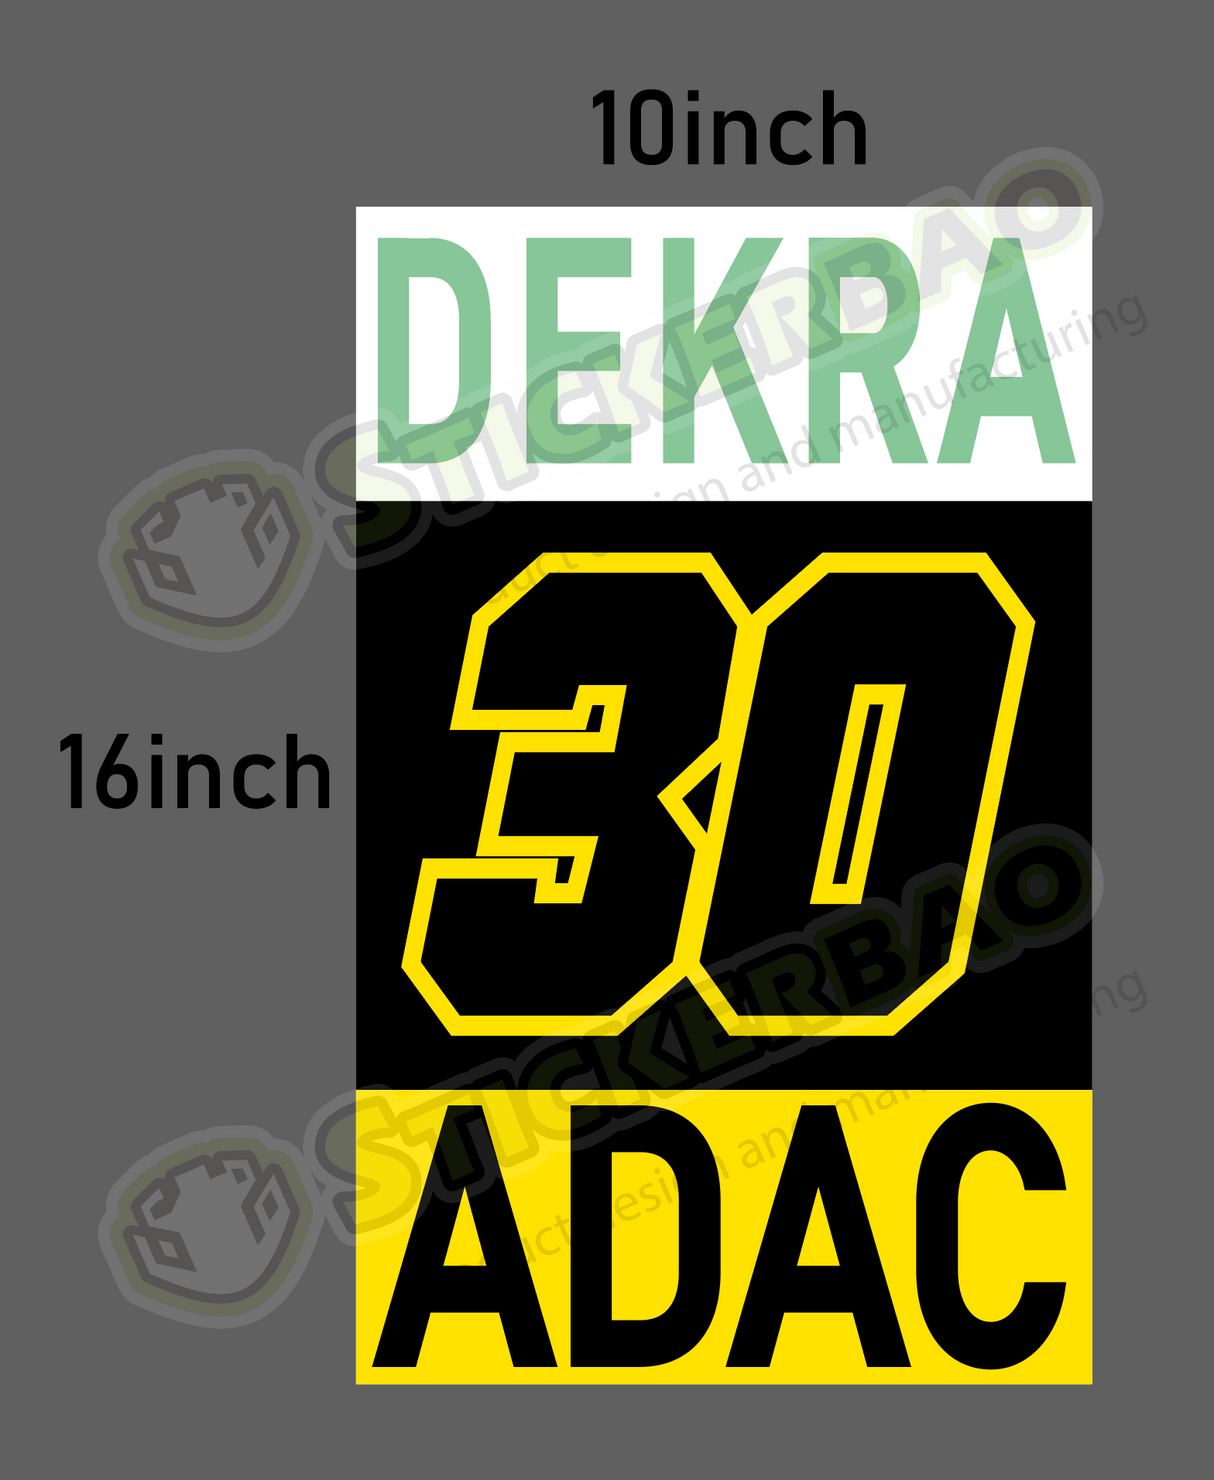 Racing Numbers Sticker Car Door Custom Autocross Vinyl Decal 2 pieces Track Day 16" x 10" inch. Custom Race Number Stickers Decals 2 pieces. You can customize your own race number plate sticker for racing. Stand out from the crowd. Printed on glossy sticker material. Removable and no marks remain after remove. Weatherproof, resistant to weak acids, alkalis, salt.